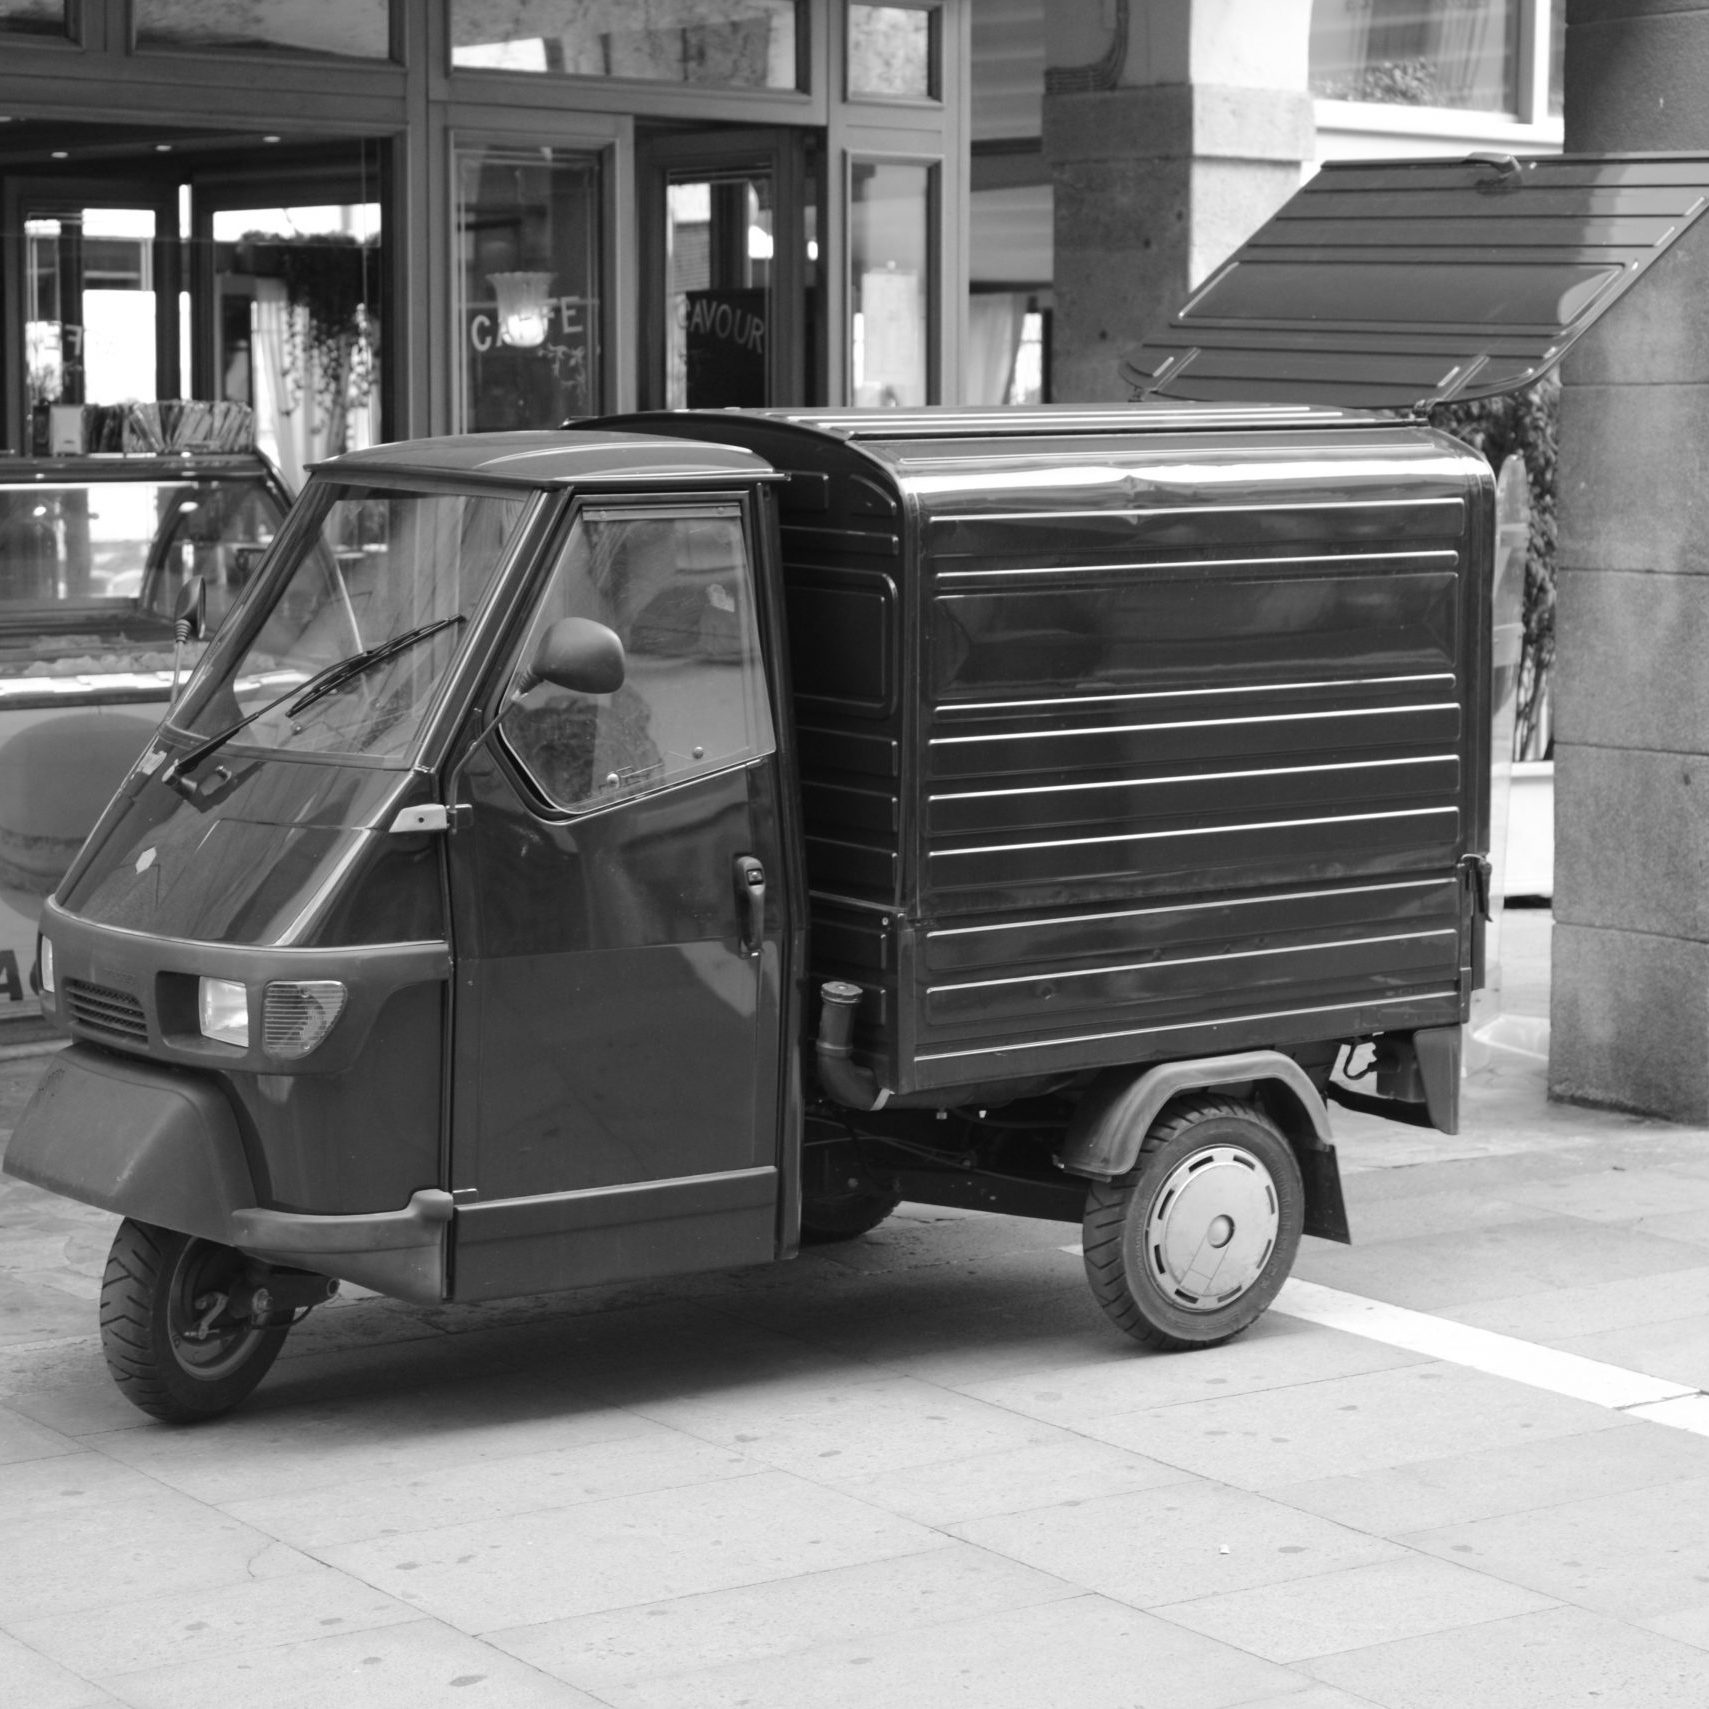 PADUA, ITALY - JUNE 18, 2015: Piaggio Ape a three-wheeled light commercial vehicle based on a vespa scooter produced since 1948 by Italian company Piaggio